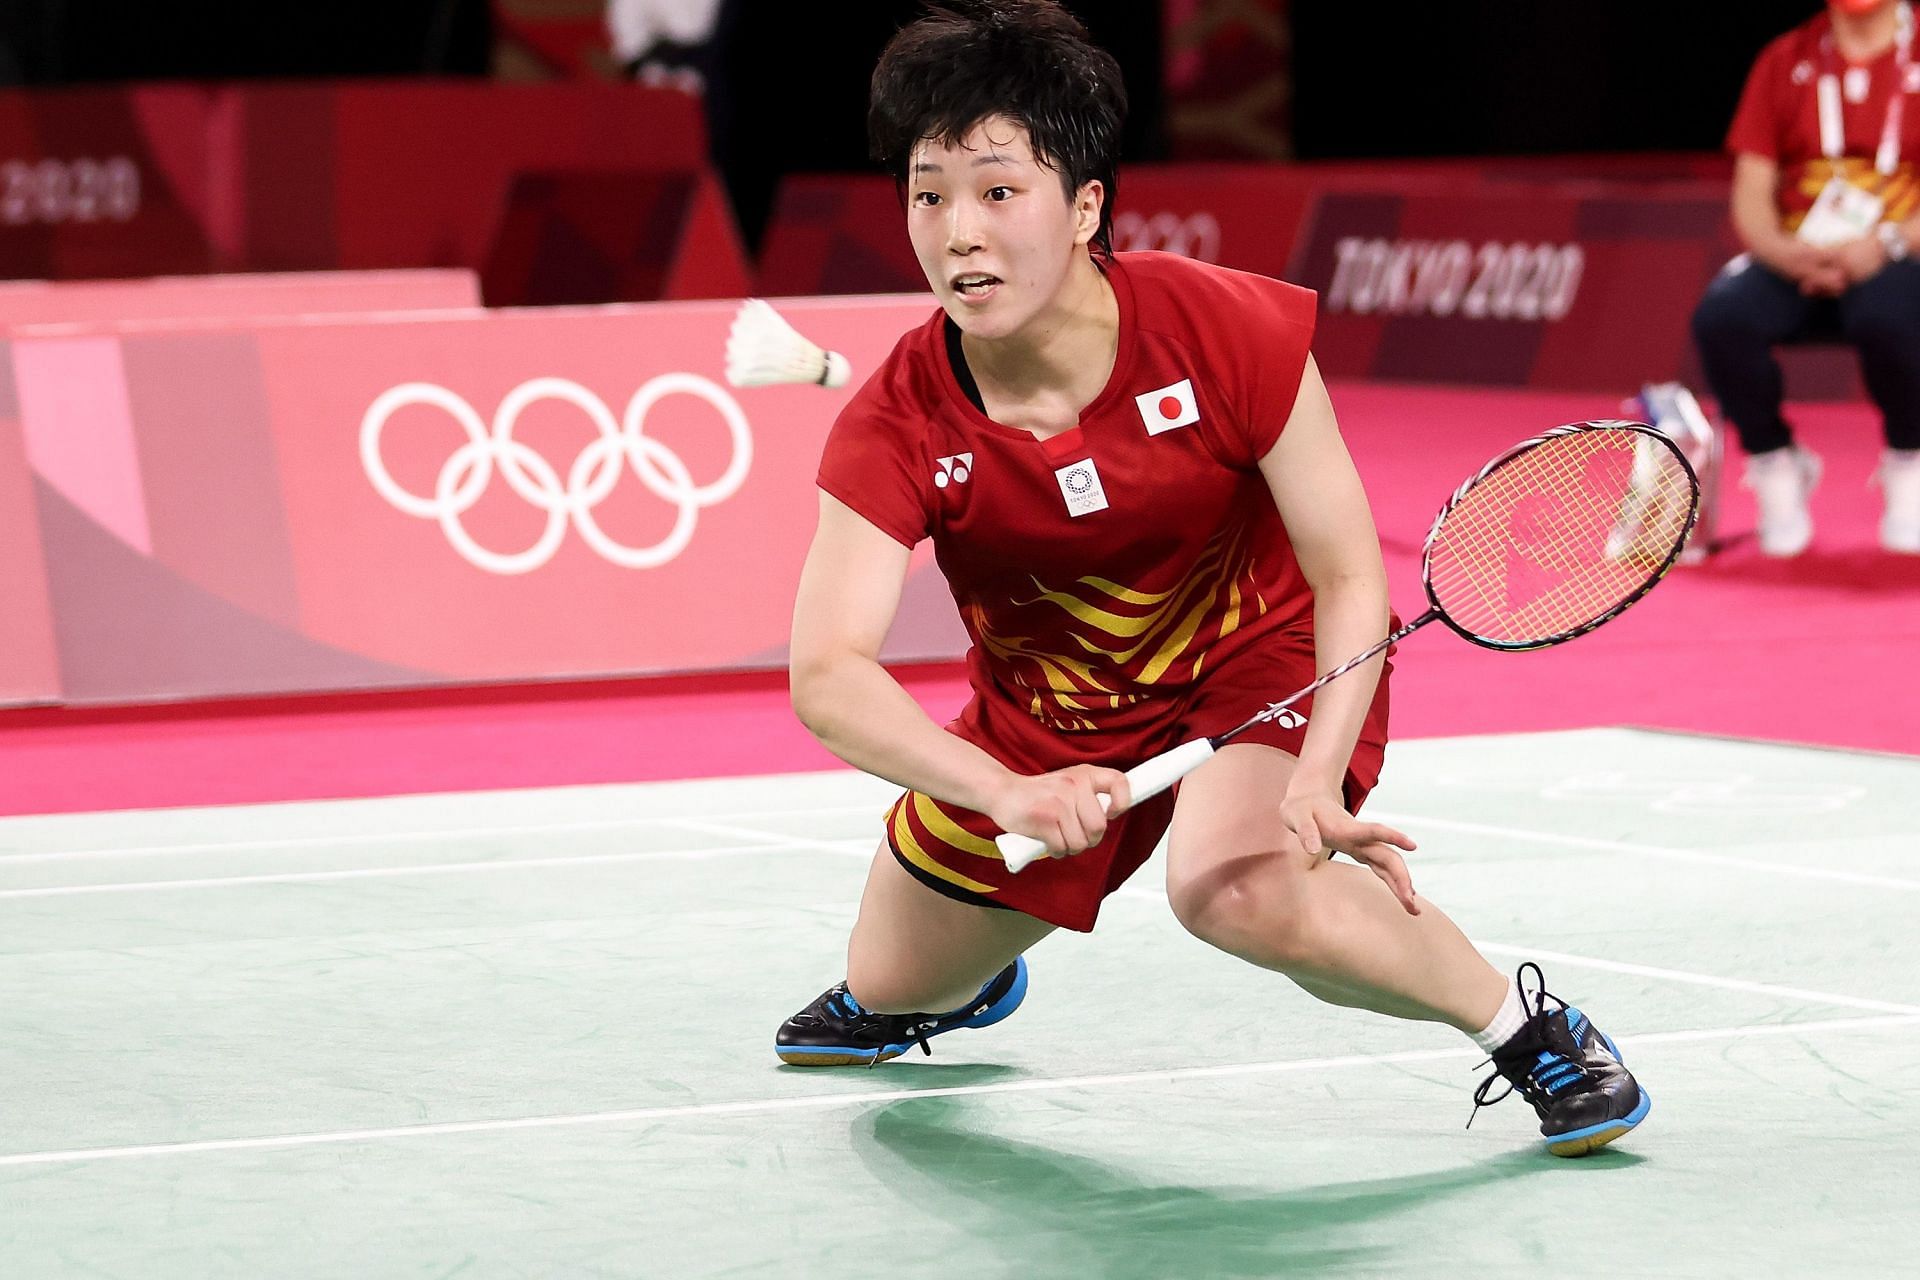 Akane Yamaguchi in action at the Tokyo Olympics